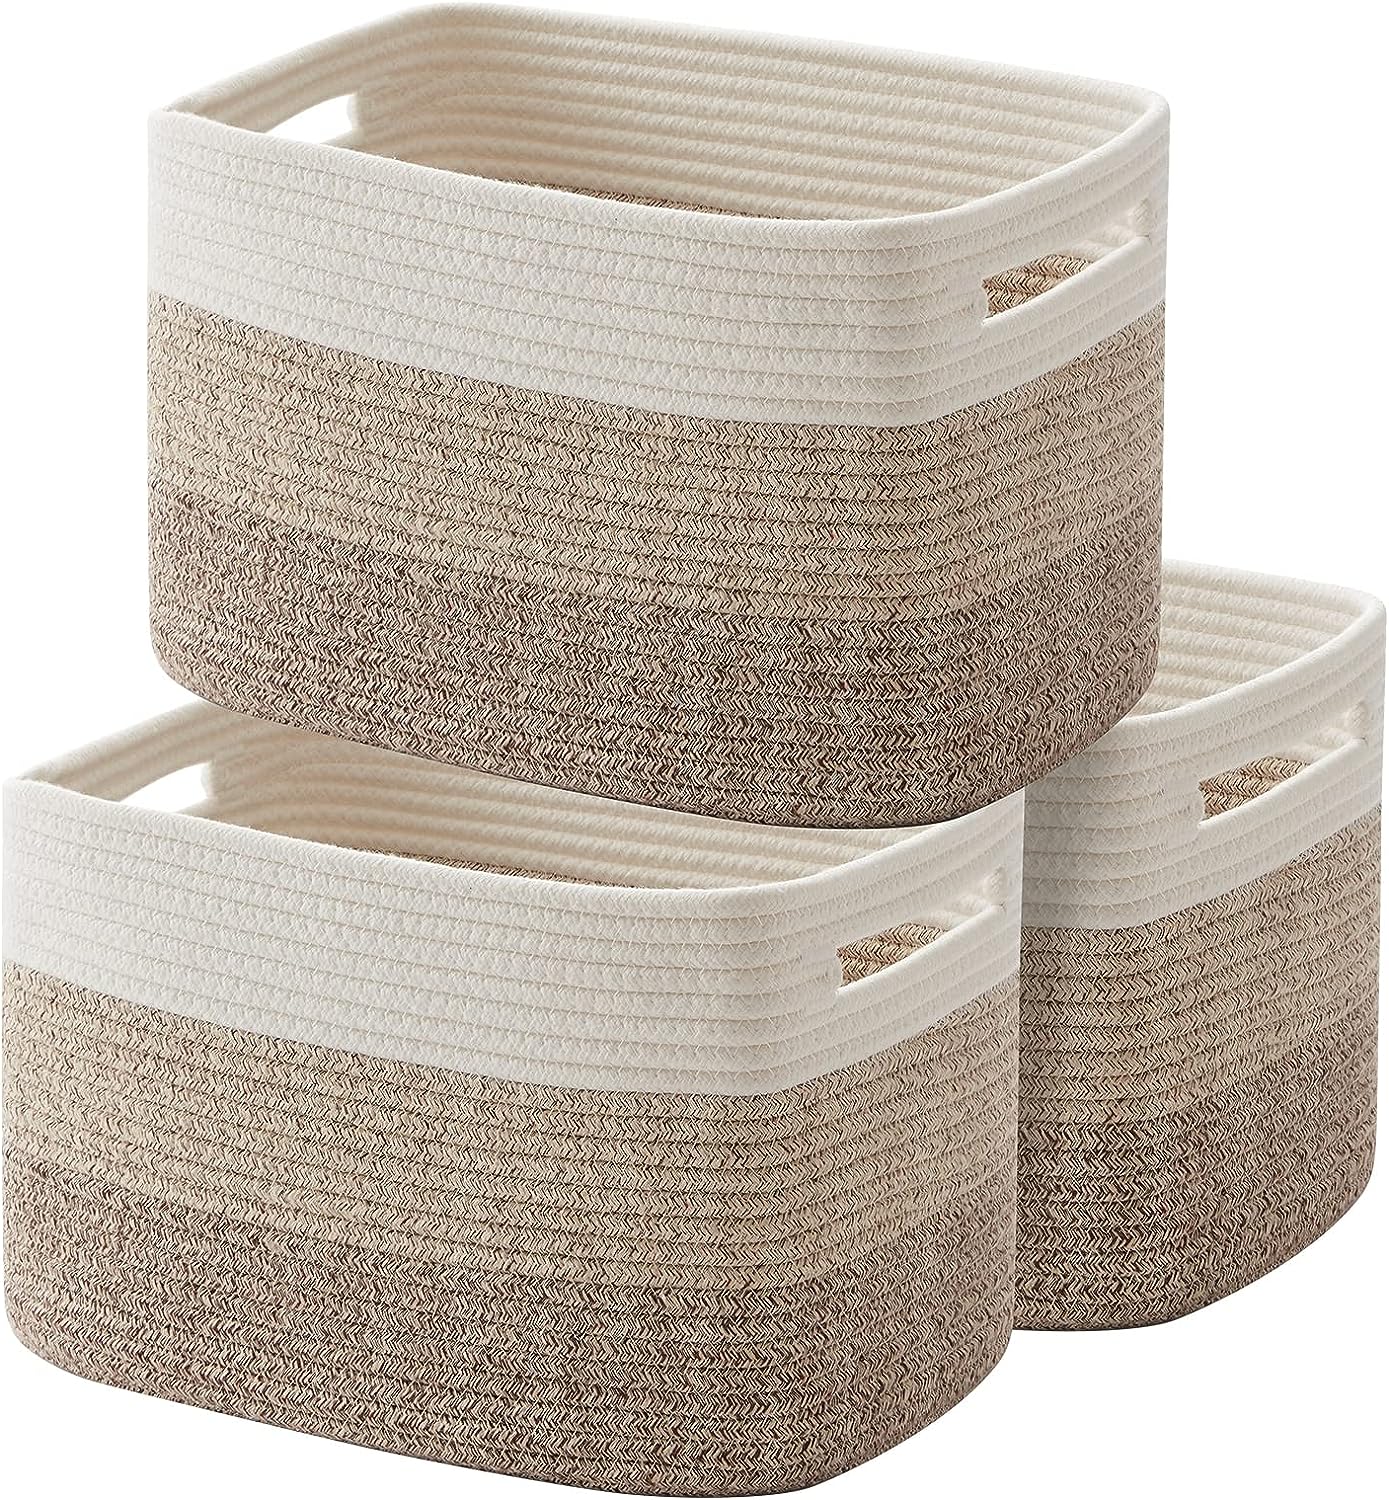 Woven Baskets for Storage